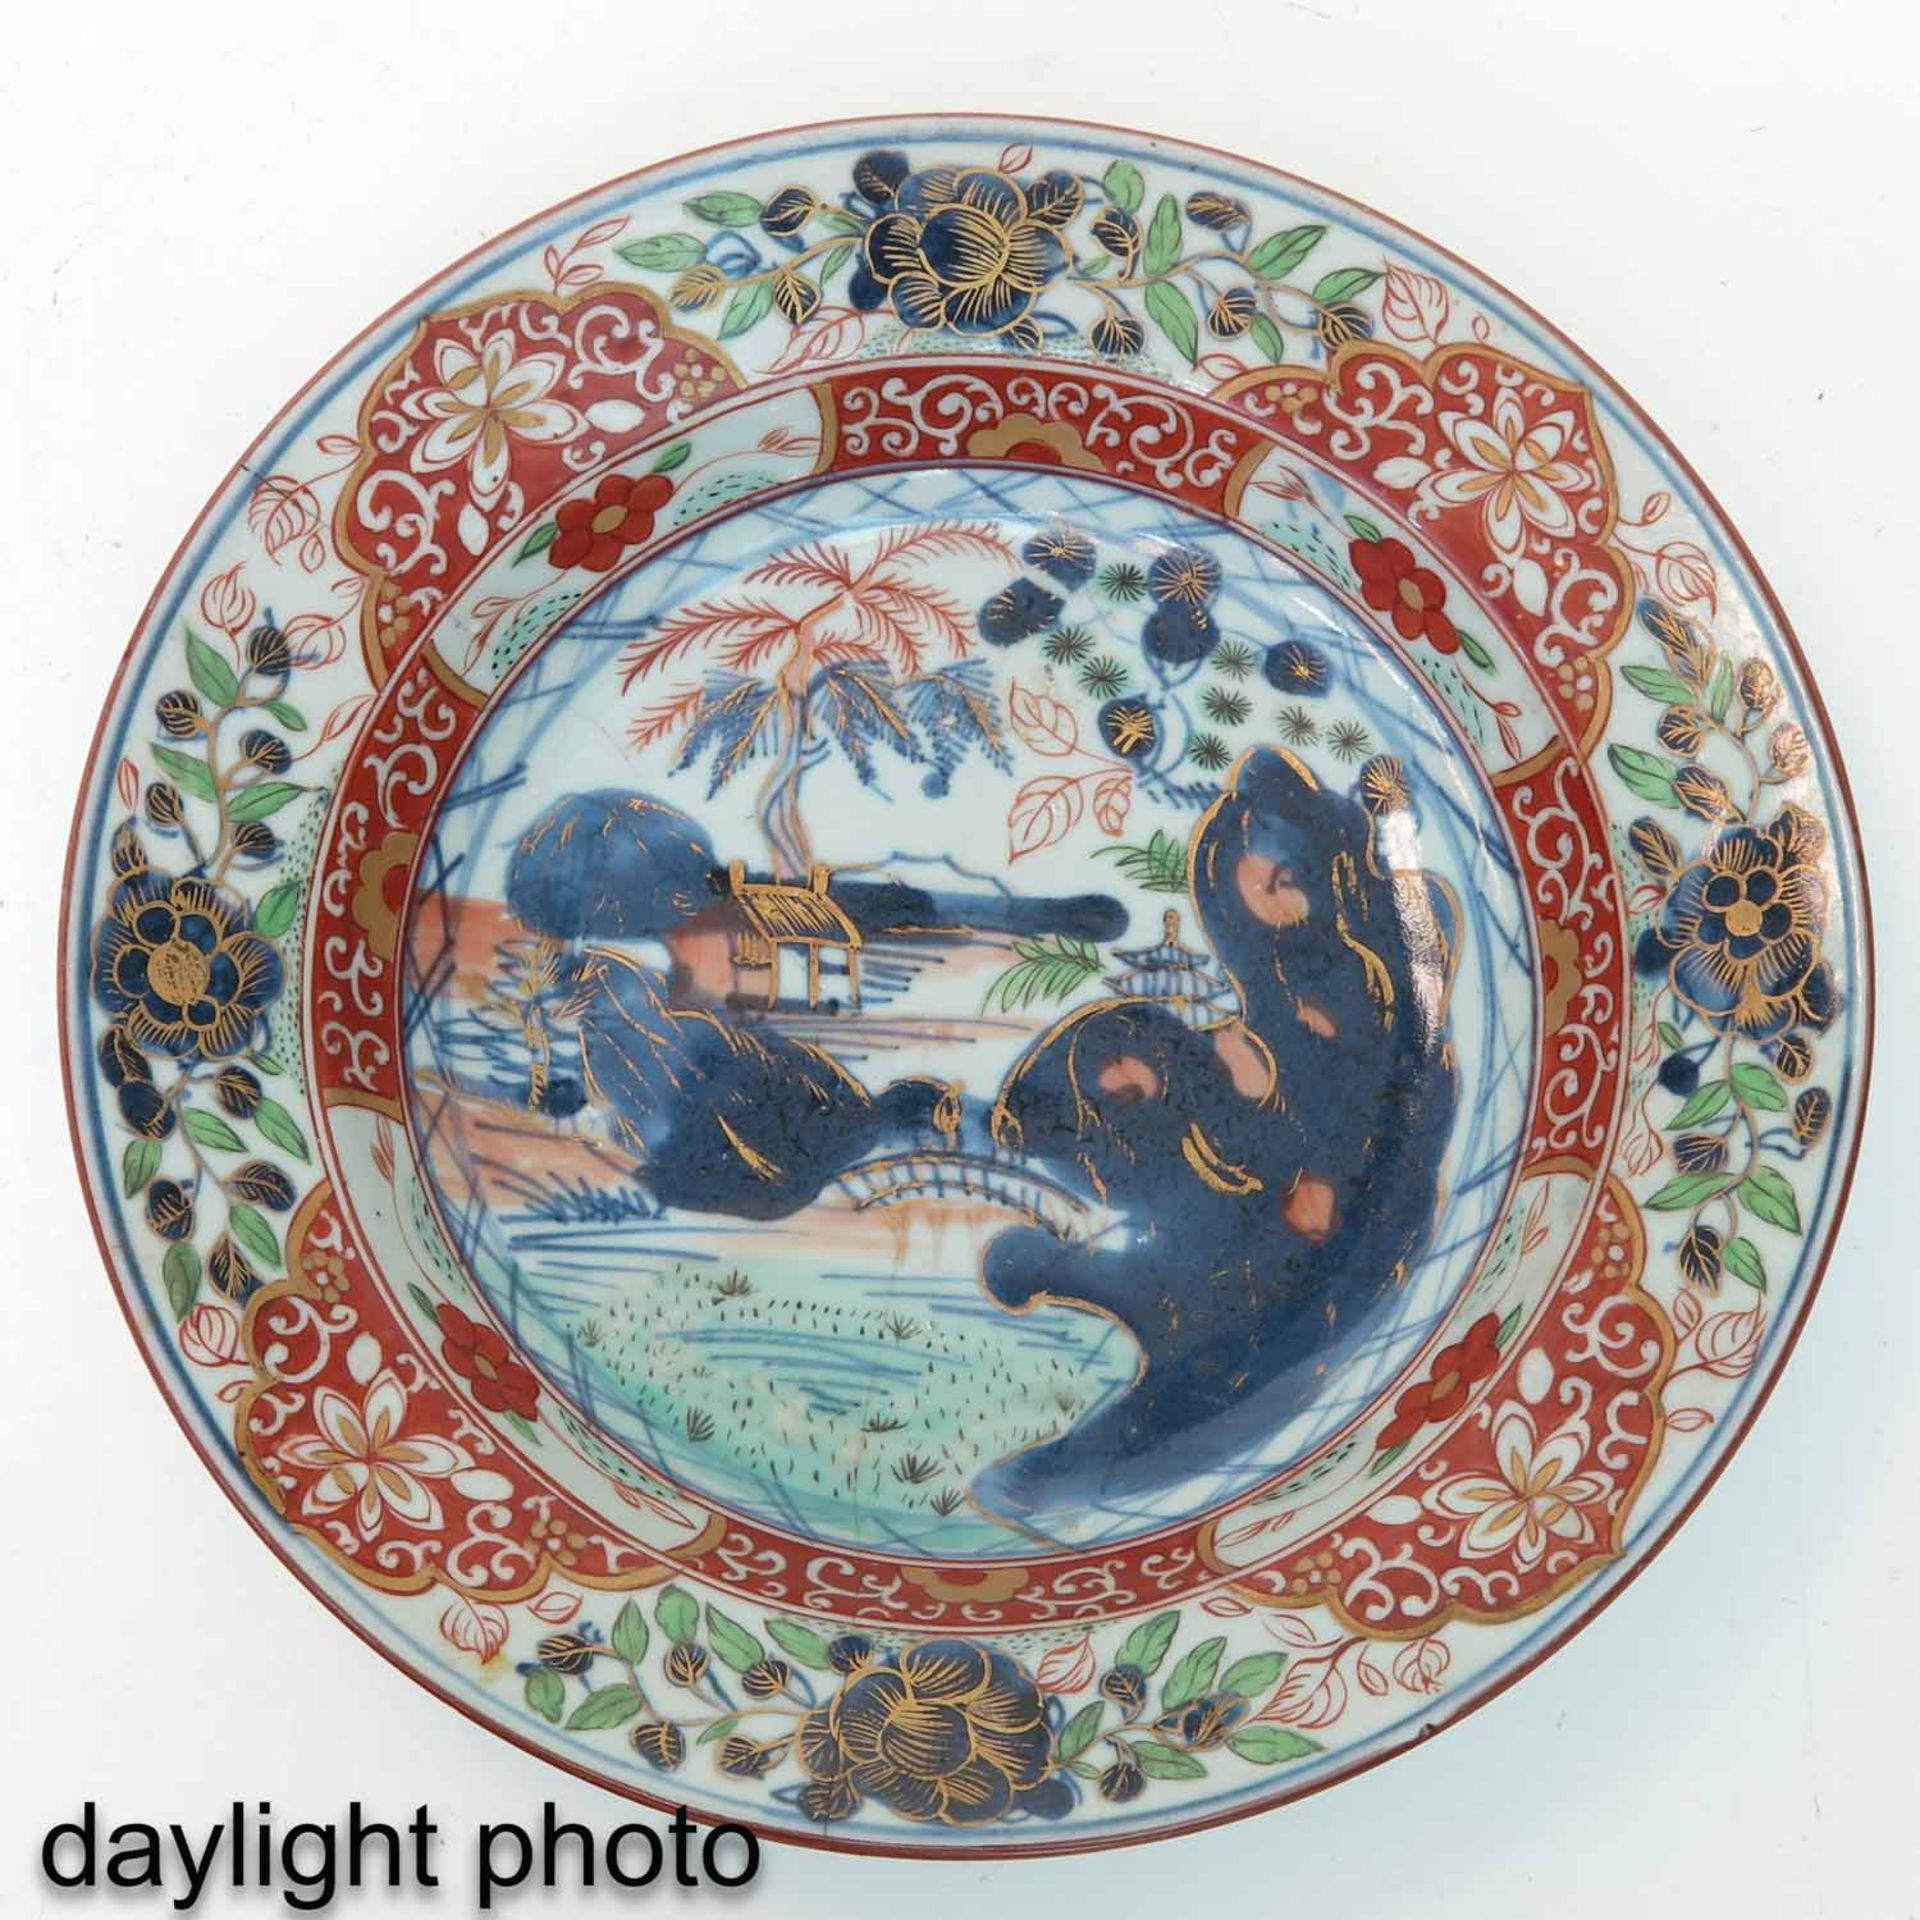 A Series of 3 Polychrome Decor Plates - Image 9 of 10